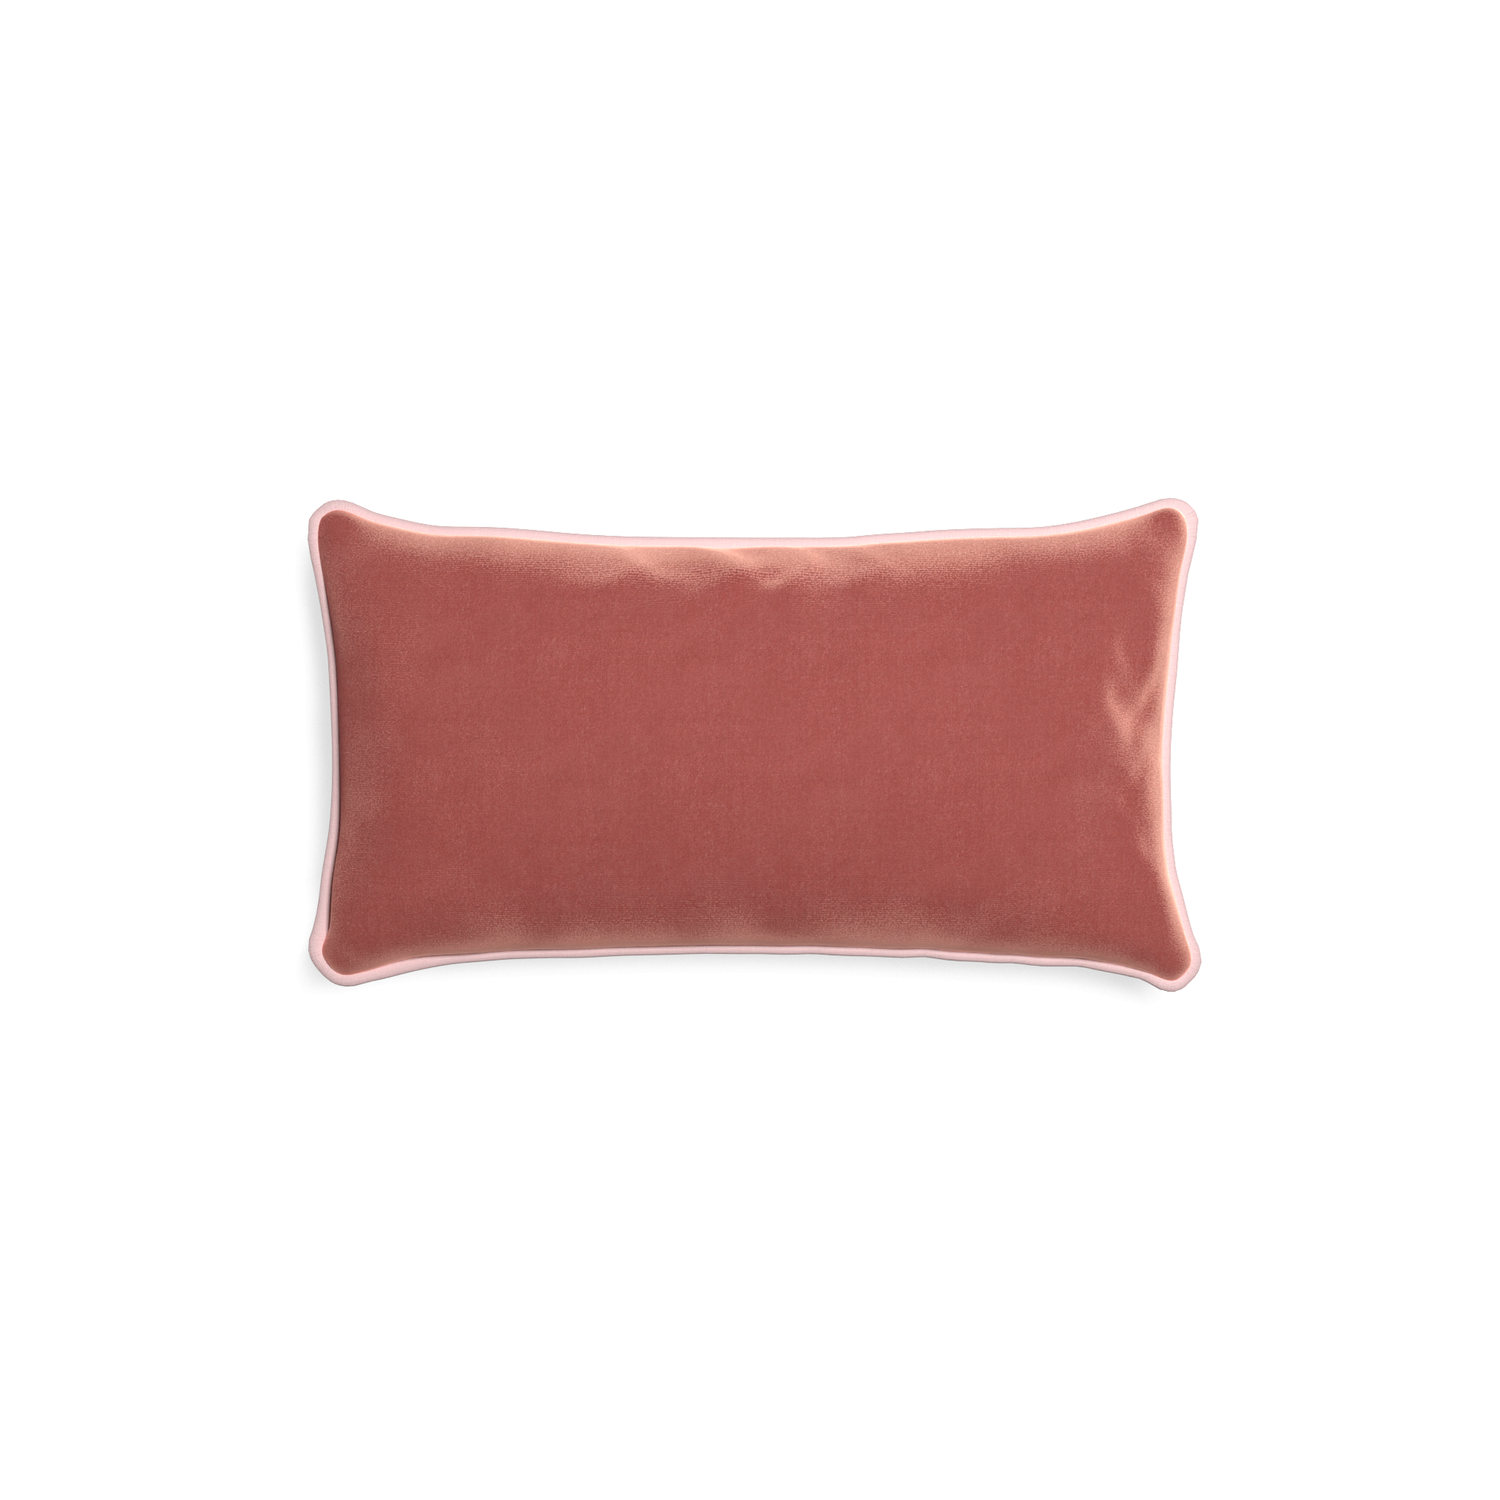 rectangle coral velvet pillow with light pink piping